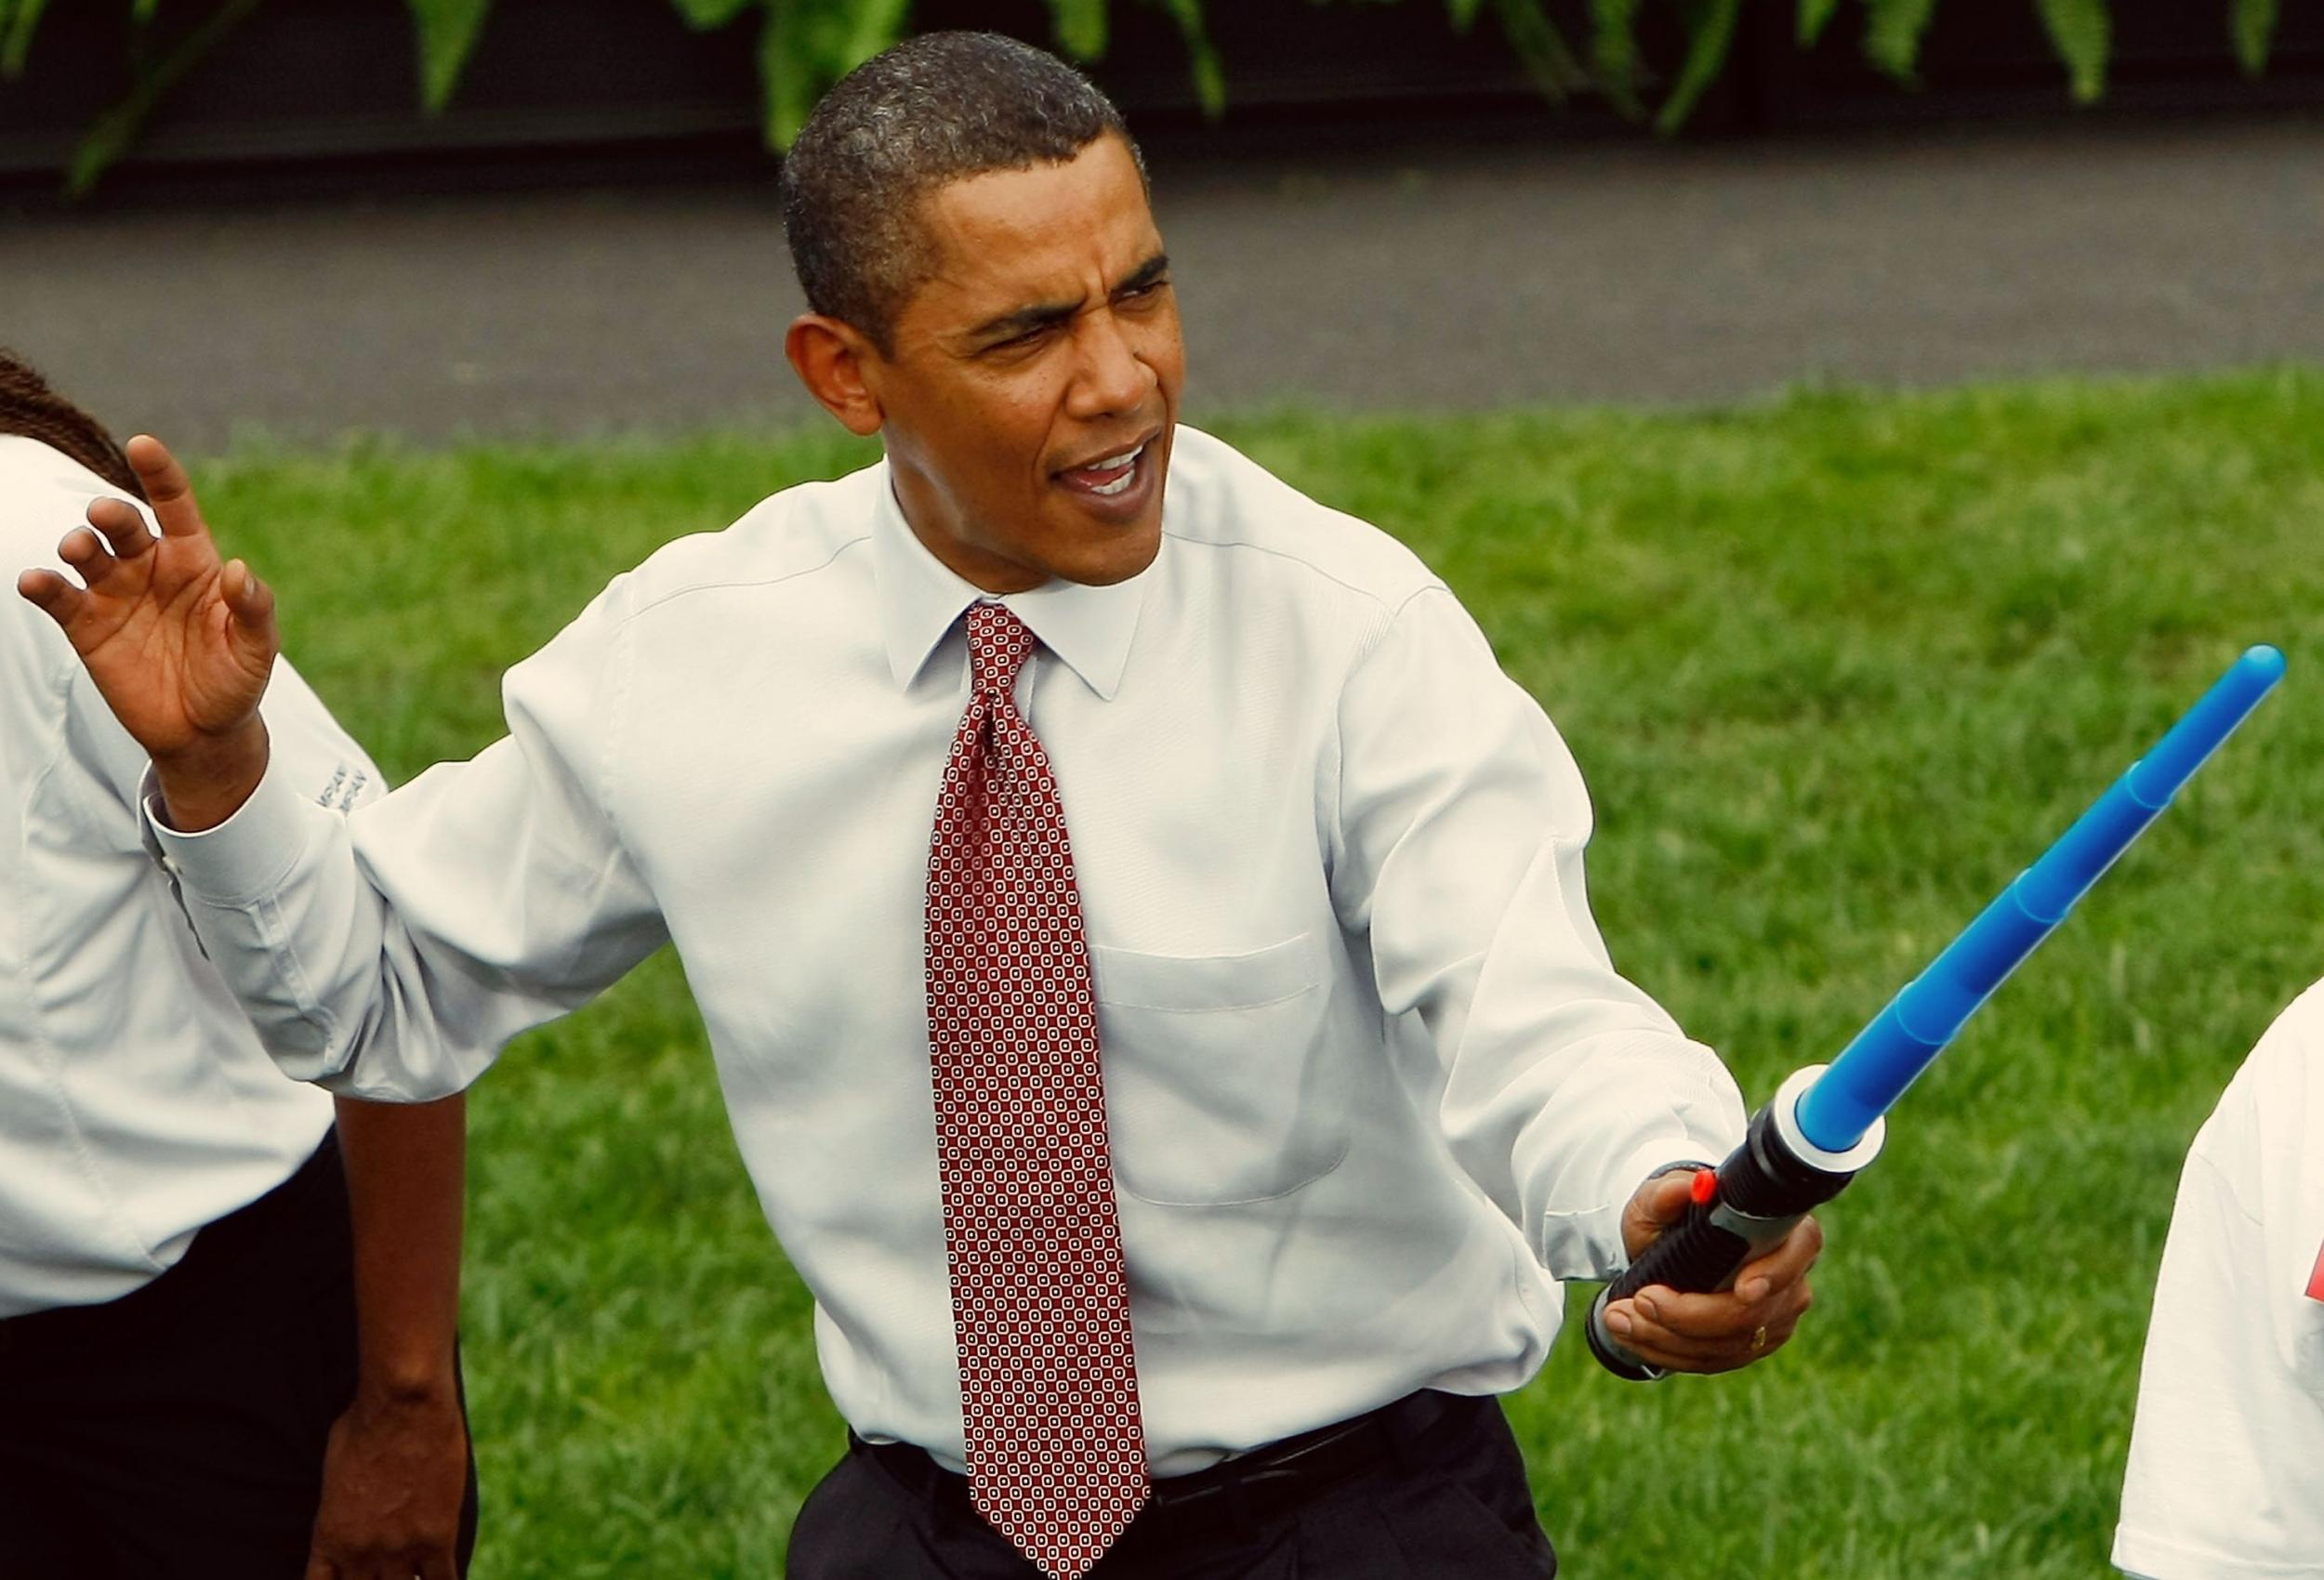 Obama readying himself to defeat a Sith Lord